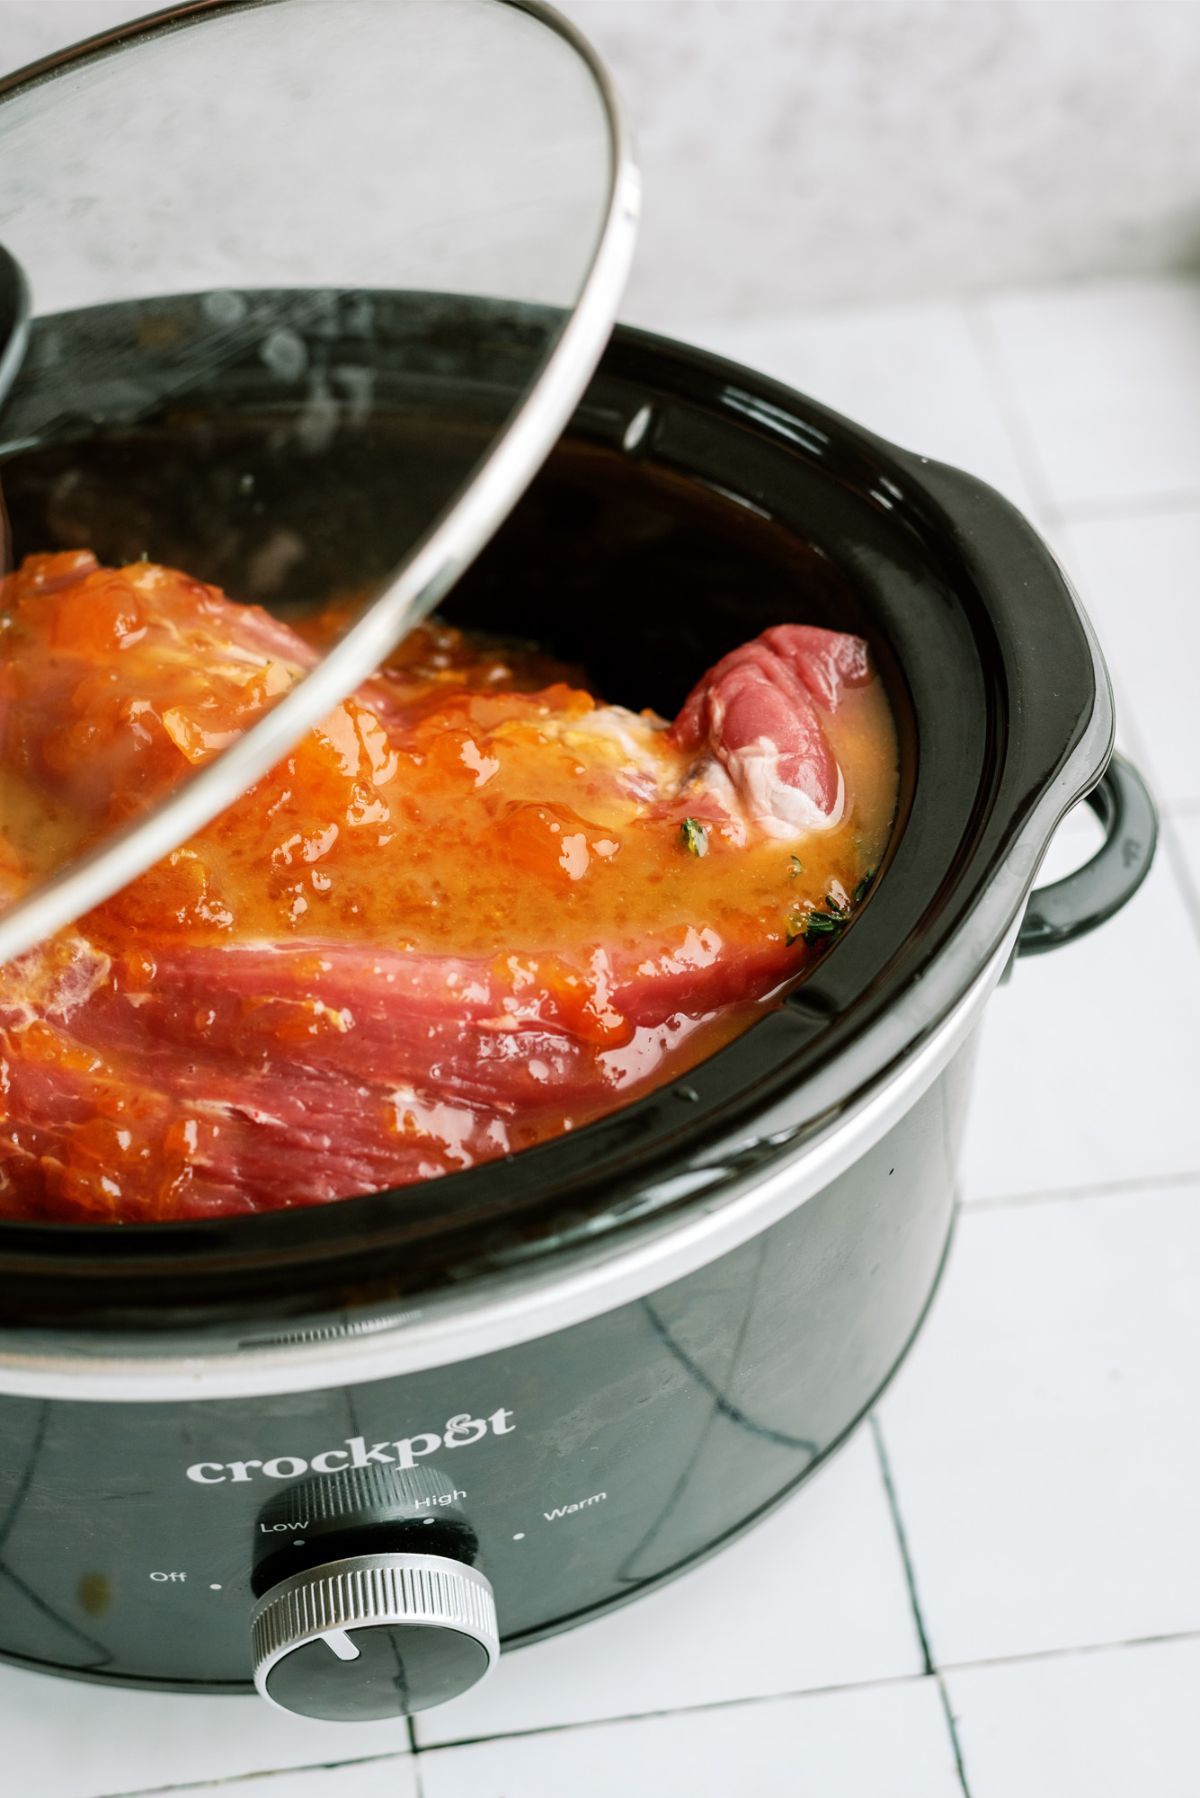 Putting the lid on the slow cooker with the pork and veggies inside.